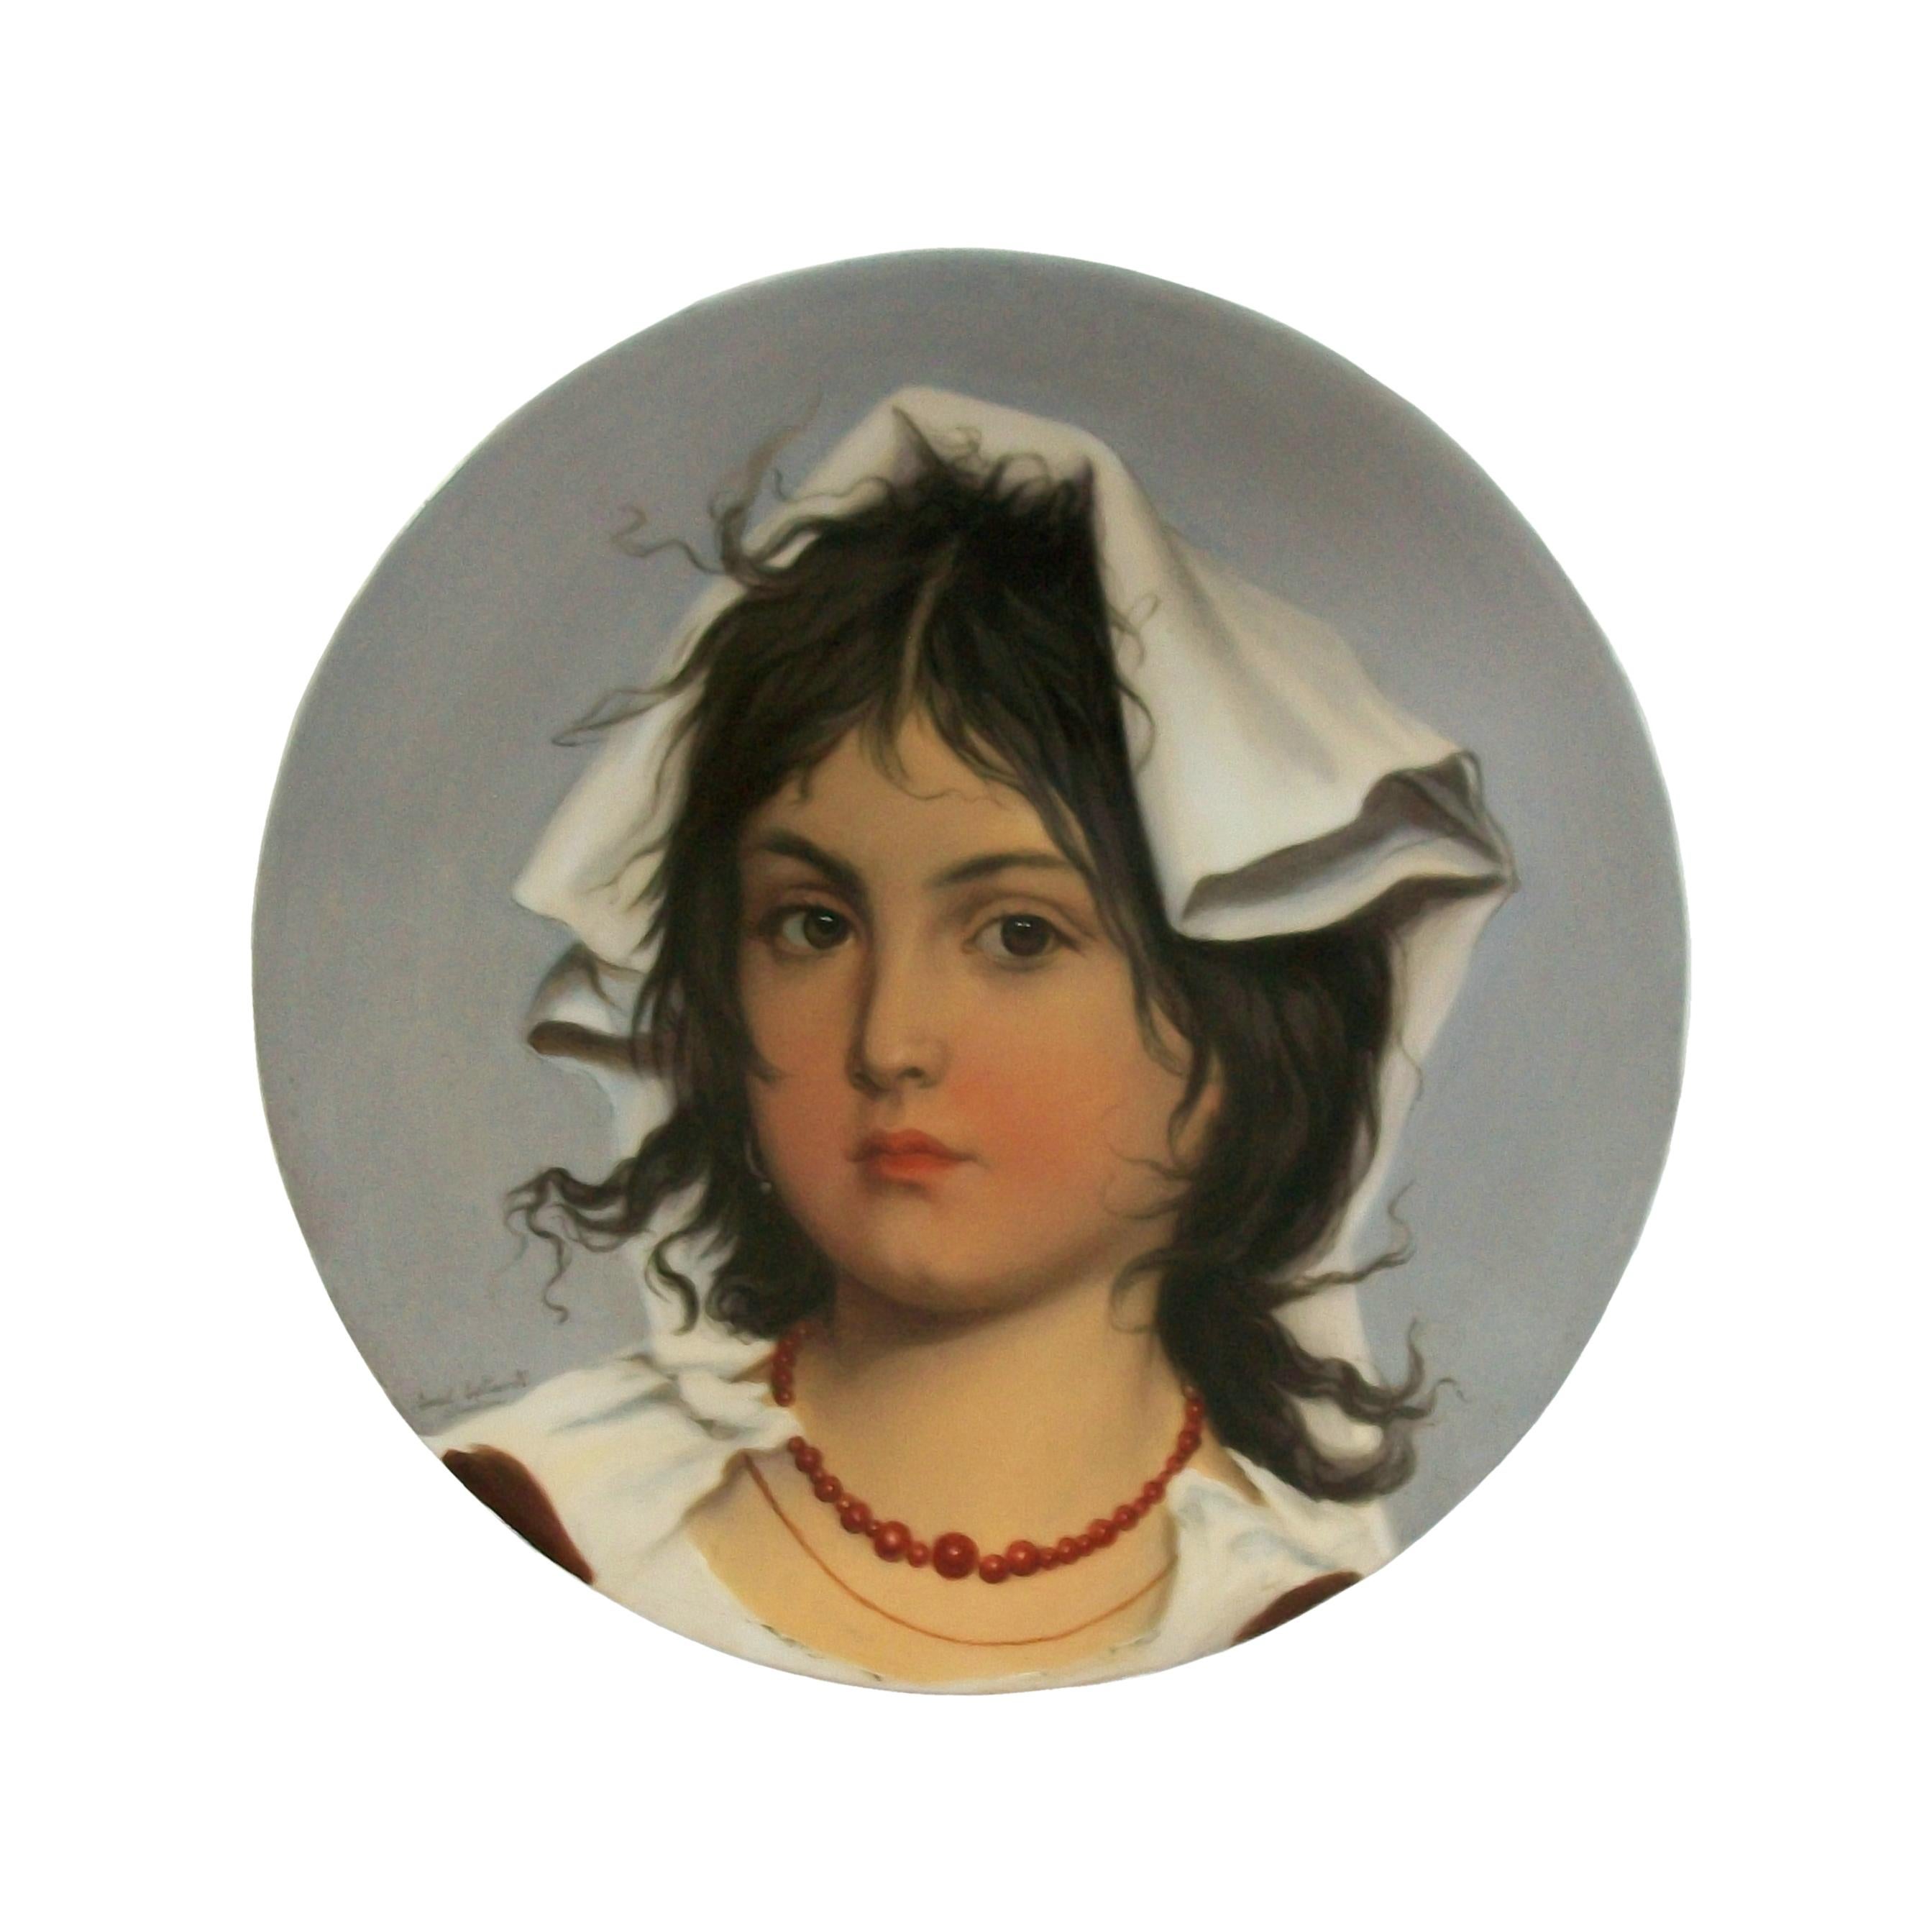 
CHRISTIAN FREDERIK EMIL ECKARDT (Danish, 1832-1914) - 'Gabriela' - PIRKENHAMMER PORCELAIN FACTORY (Fischer & Meig) - Extraordinary and rare antique porcelain cabinet plate by one of Denmark's most gifted late 19th century artists - featuring a fine